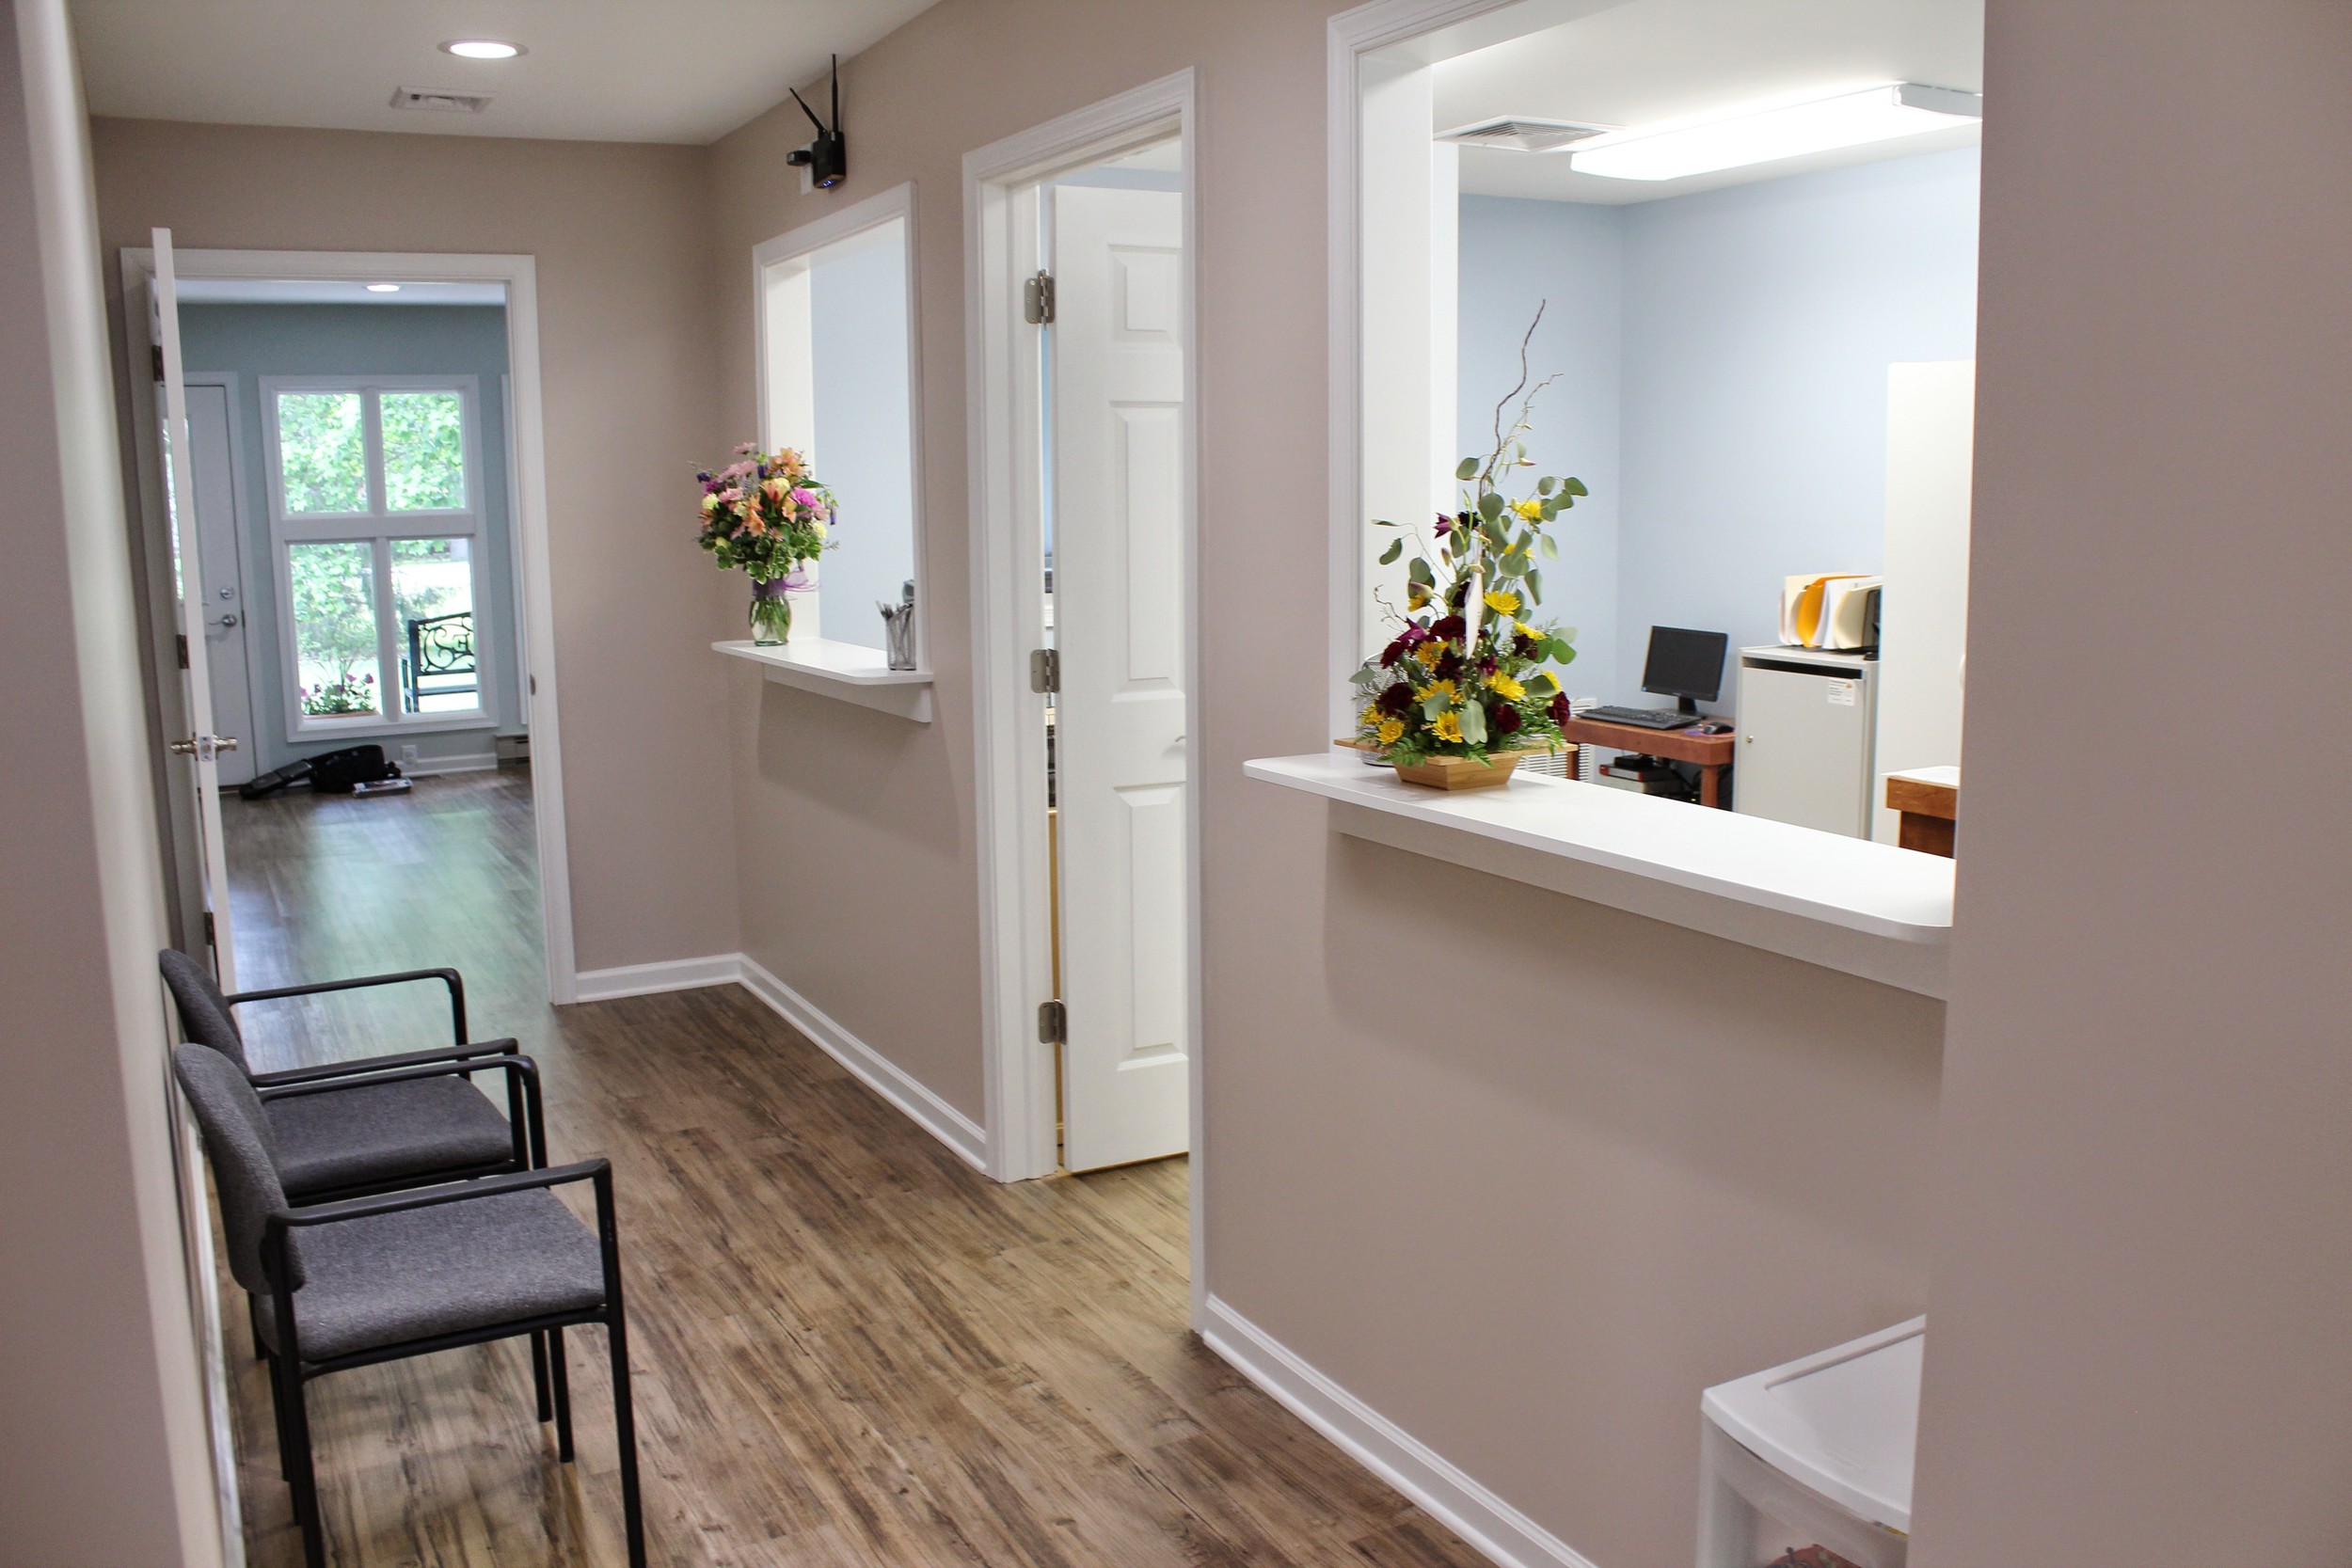 North River Dentistry renovation photos - front office